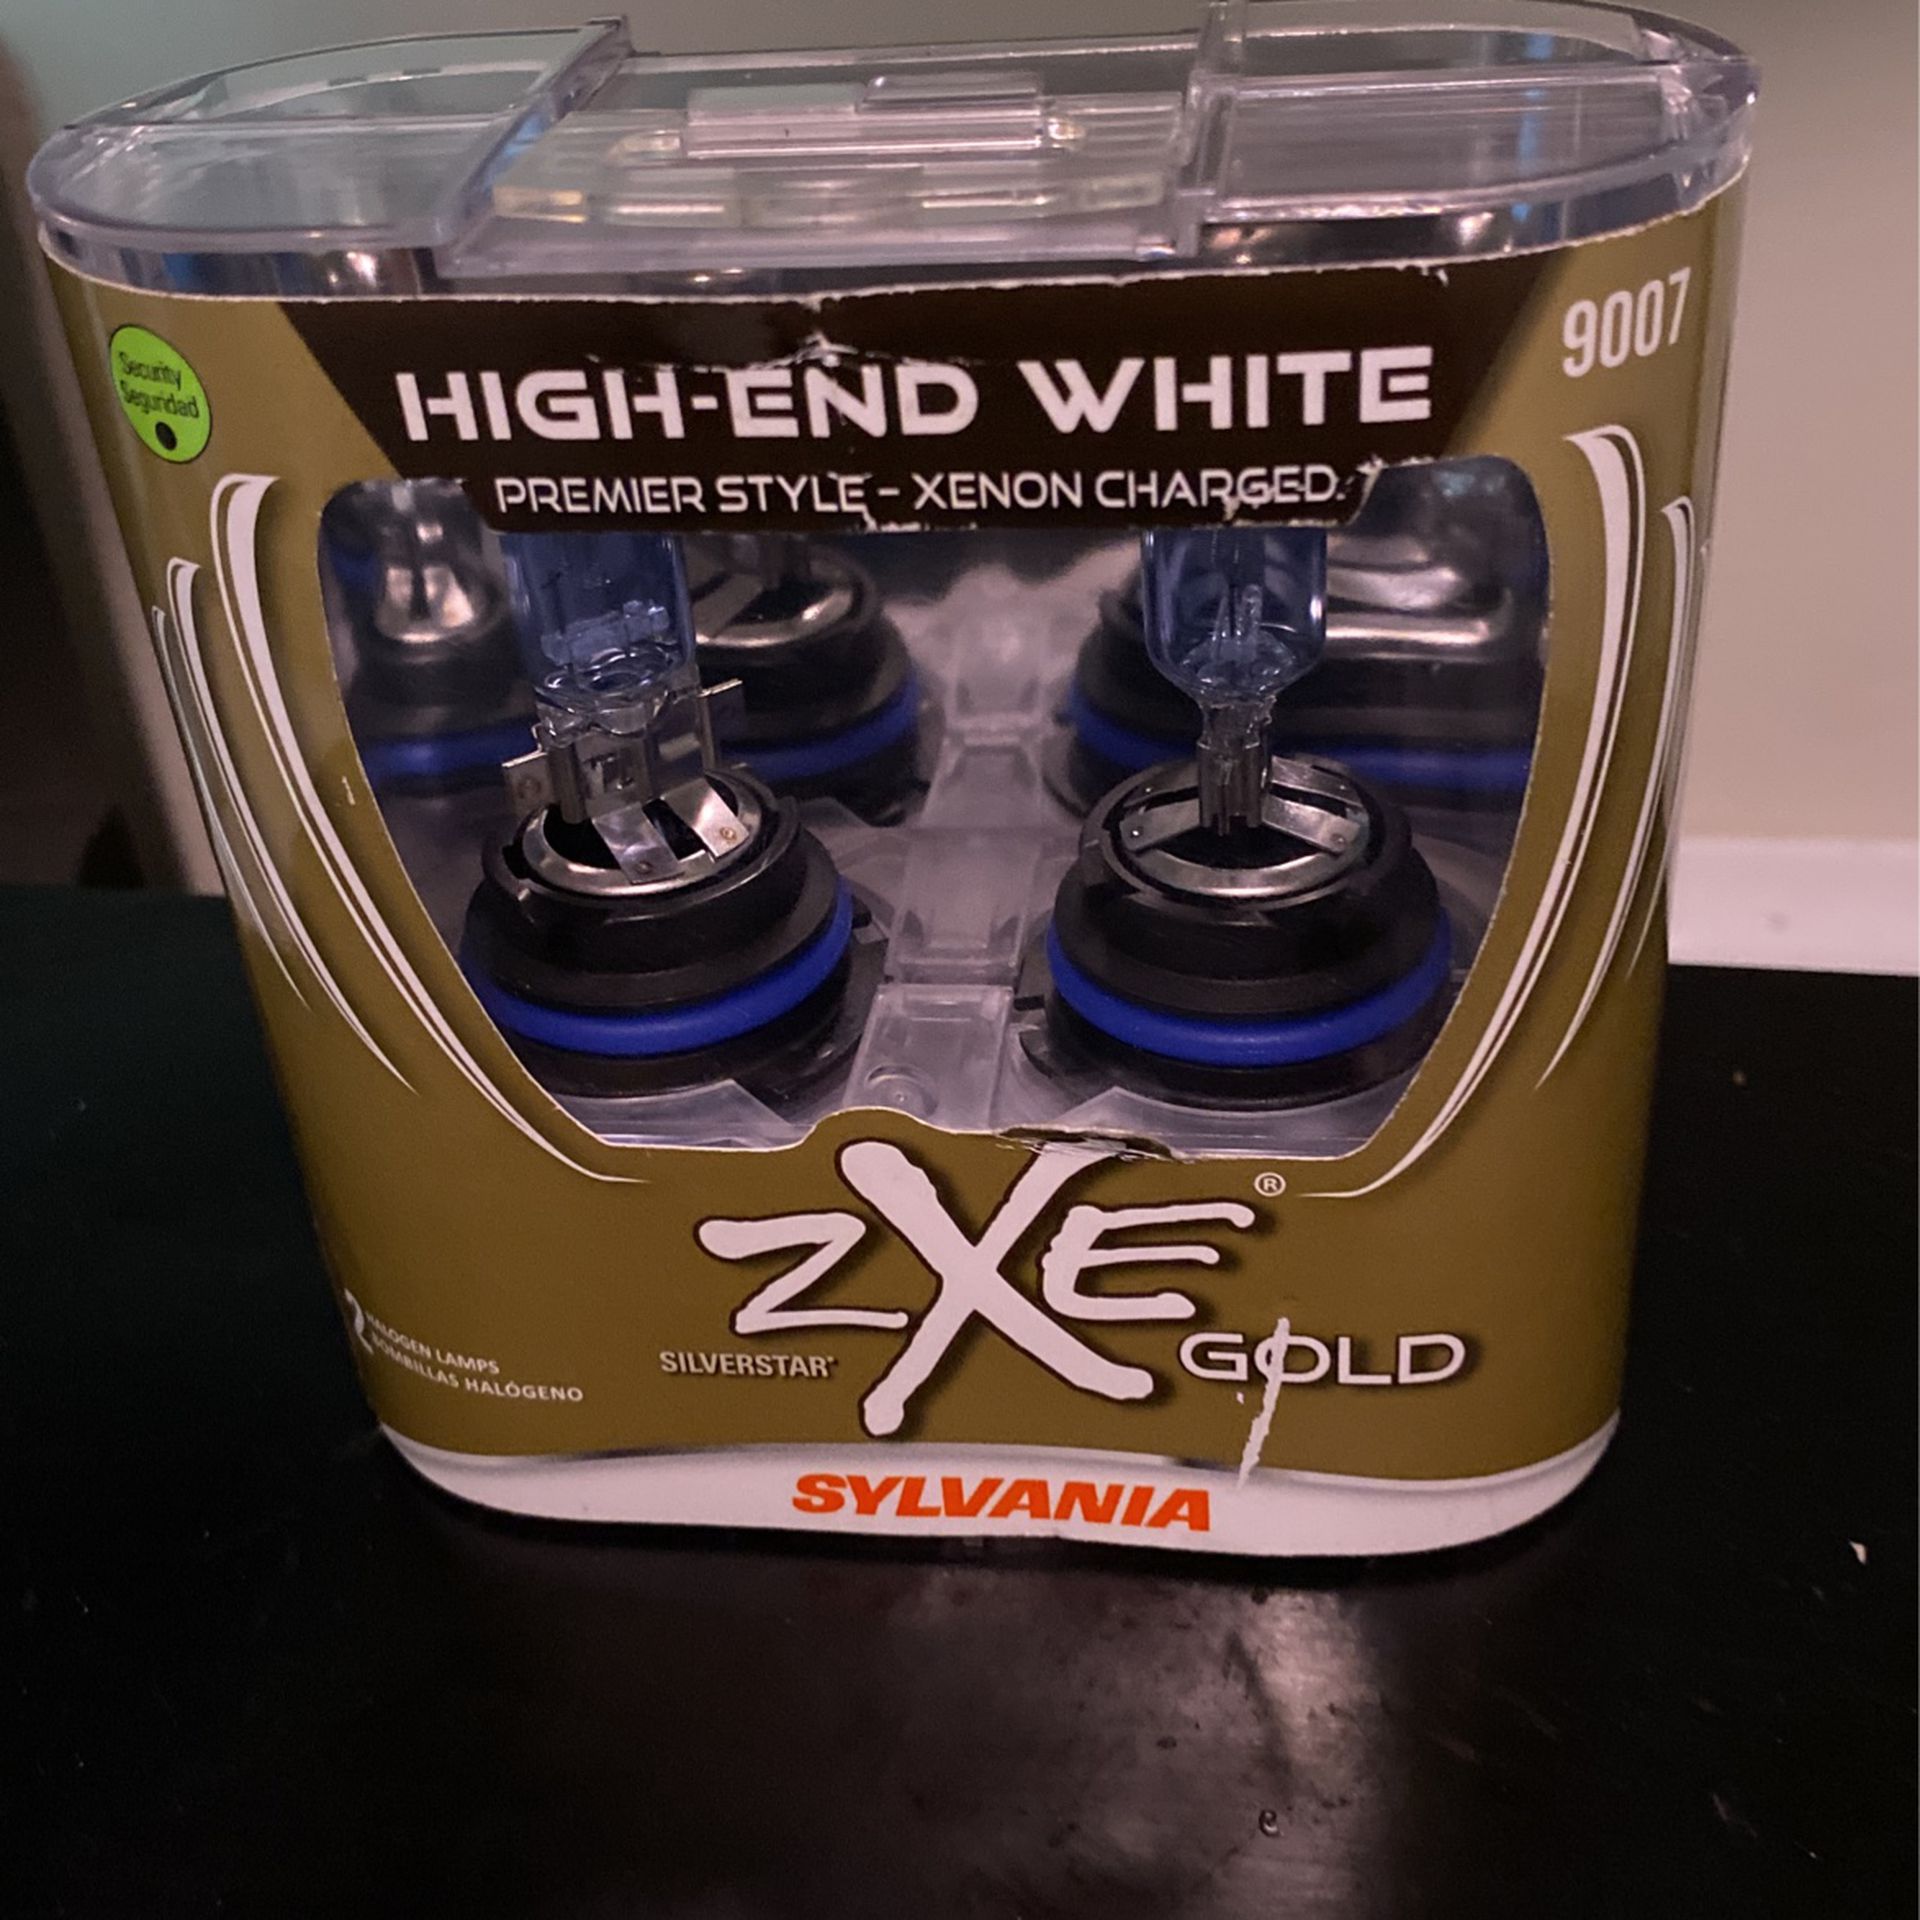 Brand New Unopened, 9007 High-End White Xenon Charged ZXE Gold Headlight